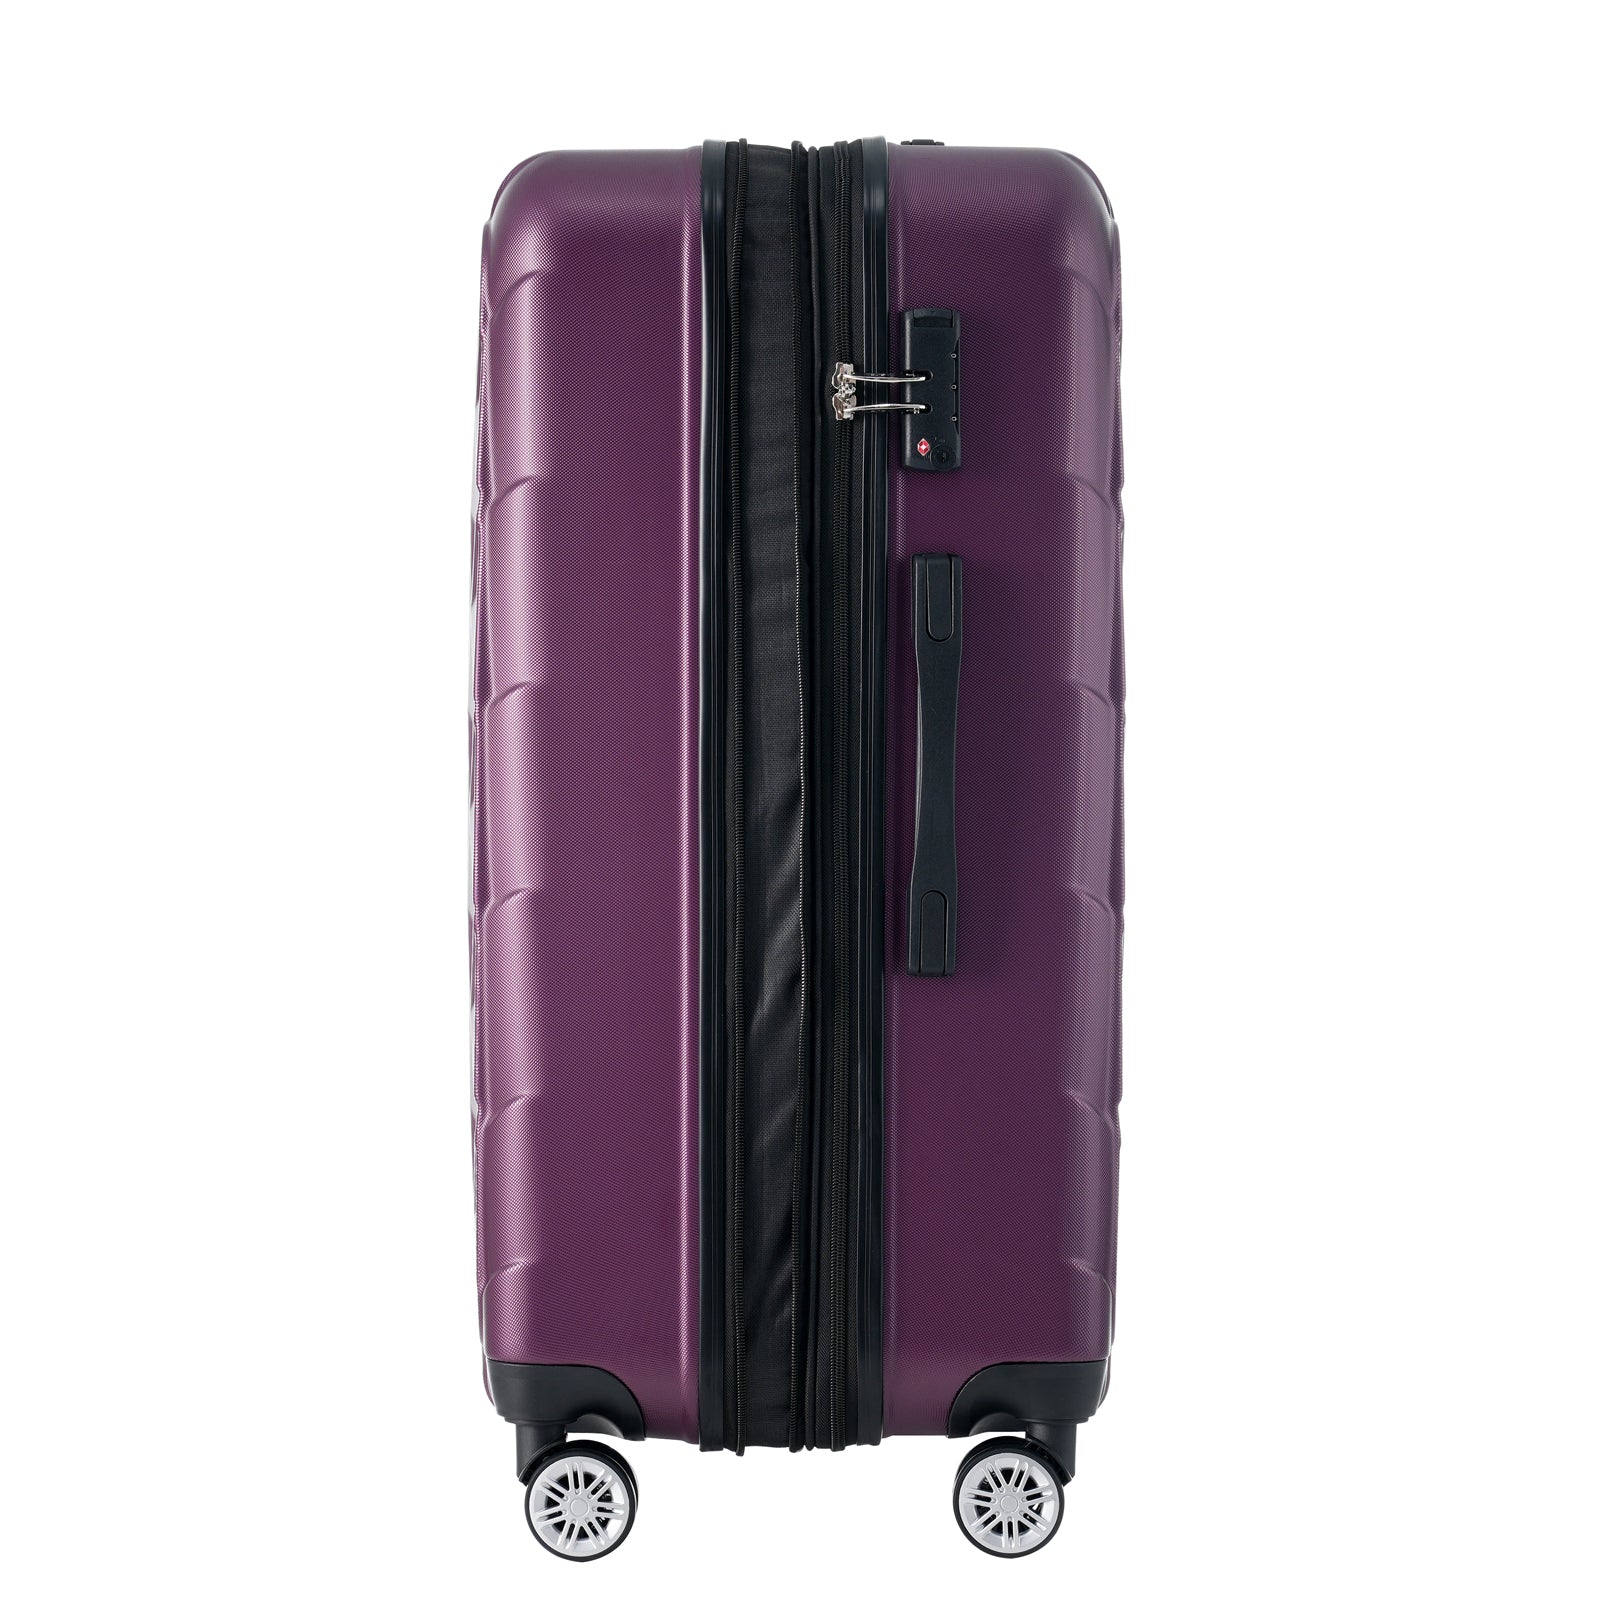 3 Piece Luggage Set Suitcase Set, ABS Hard Shell violet-abs